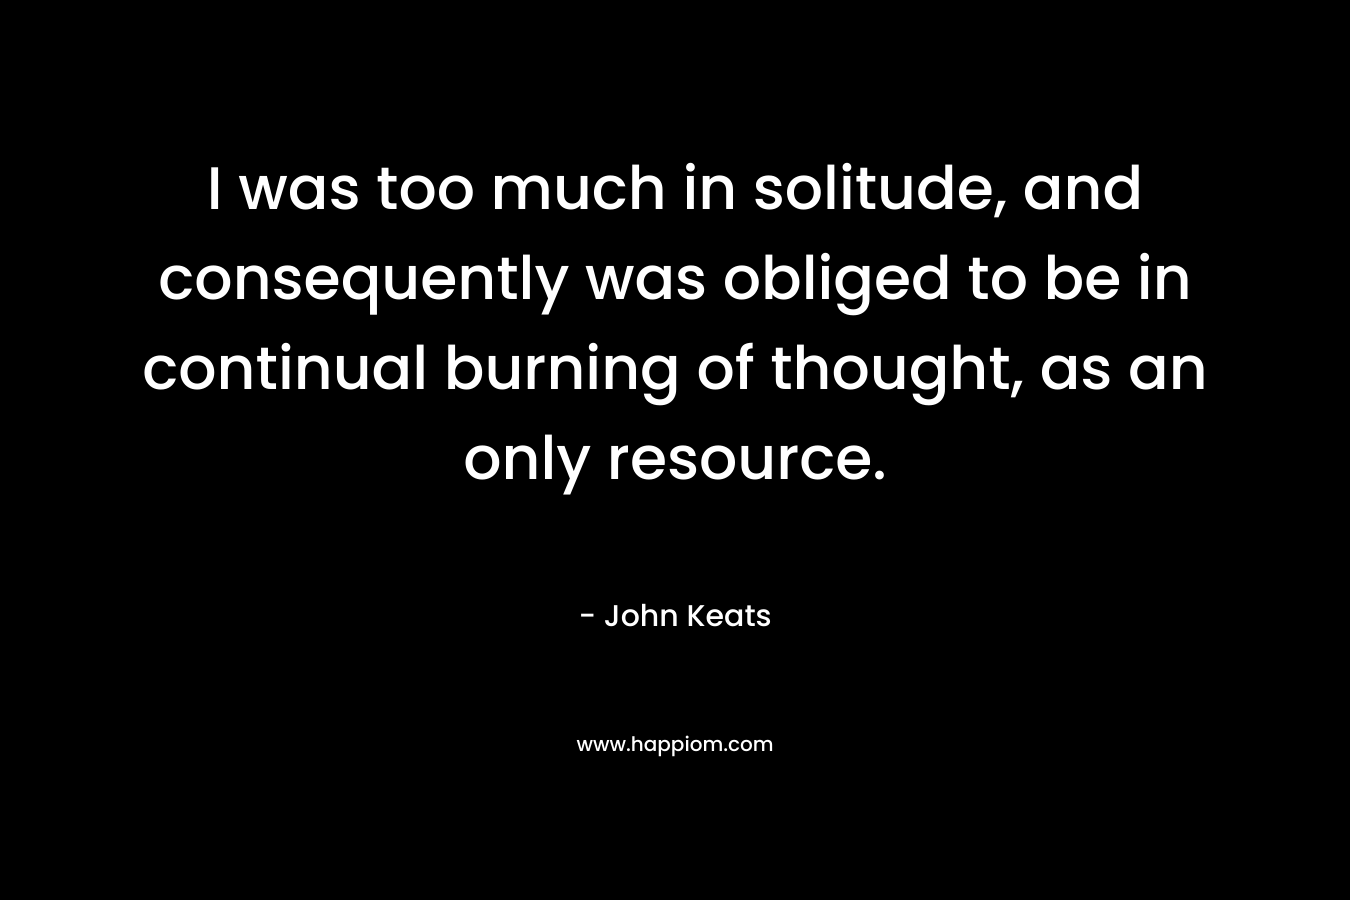 I was too much in solitude, and consequently was obliged to be in continual burning of thought, as an only resource. – John Keats